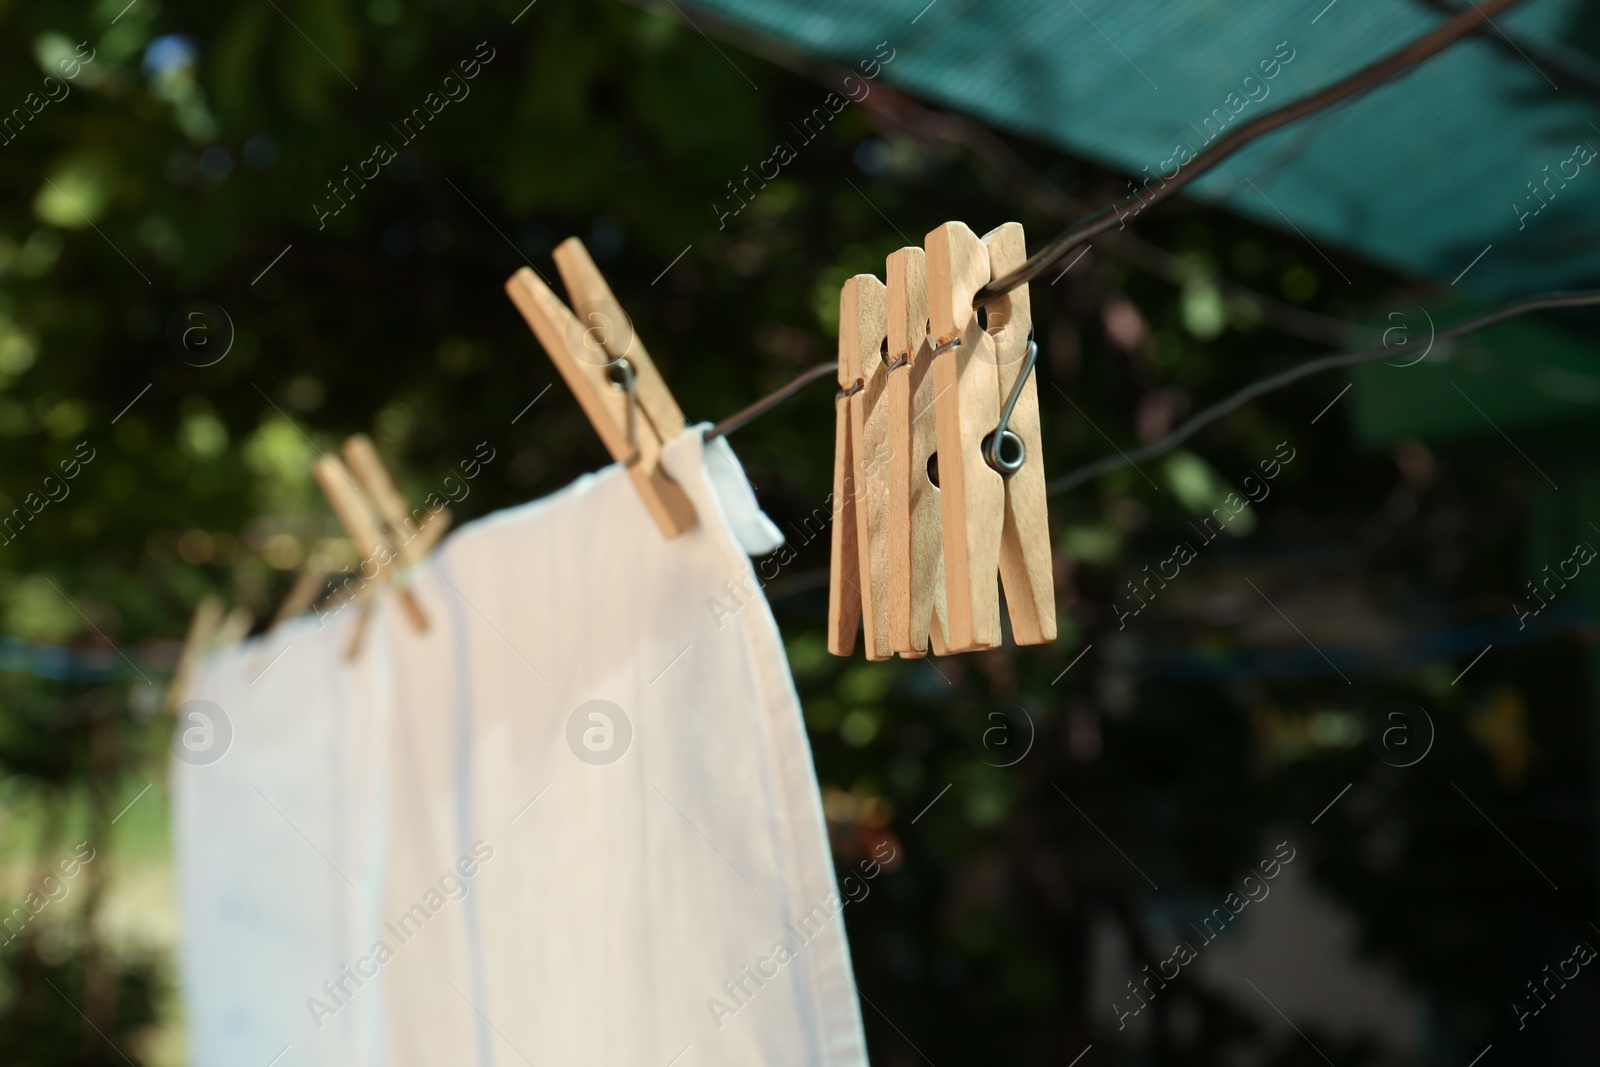 Photo of Washing line with clean laundry and clothespins outdoors, closeup